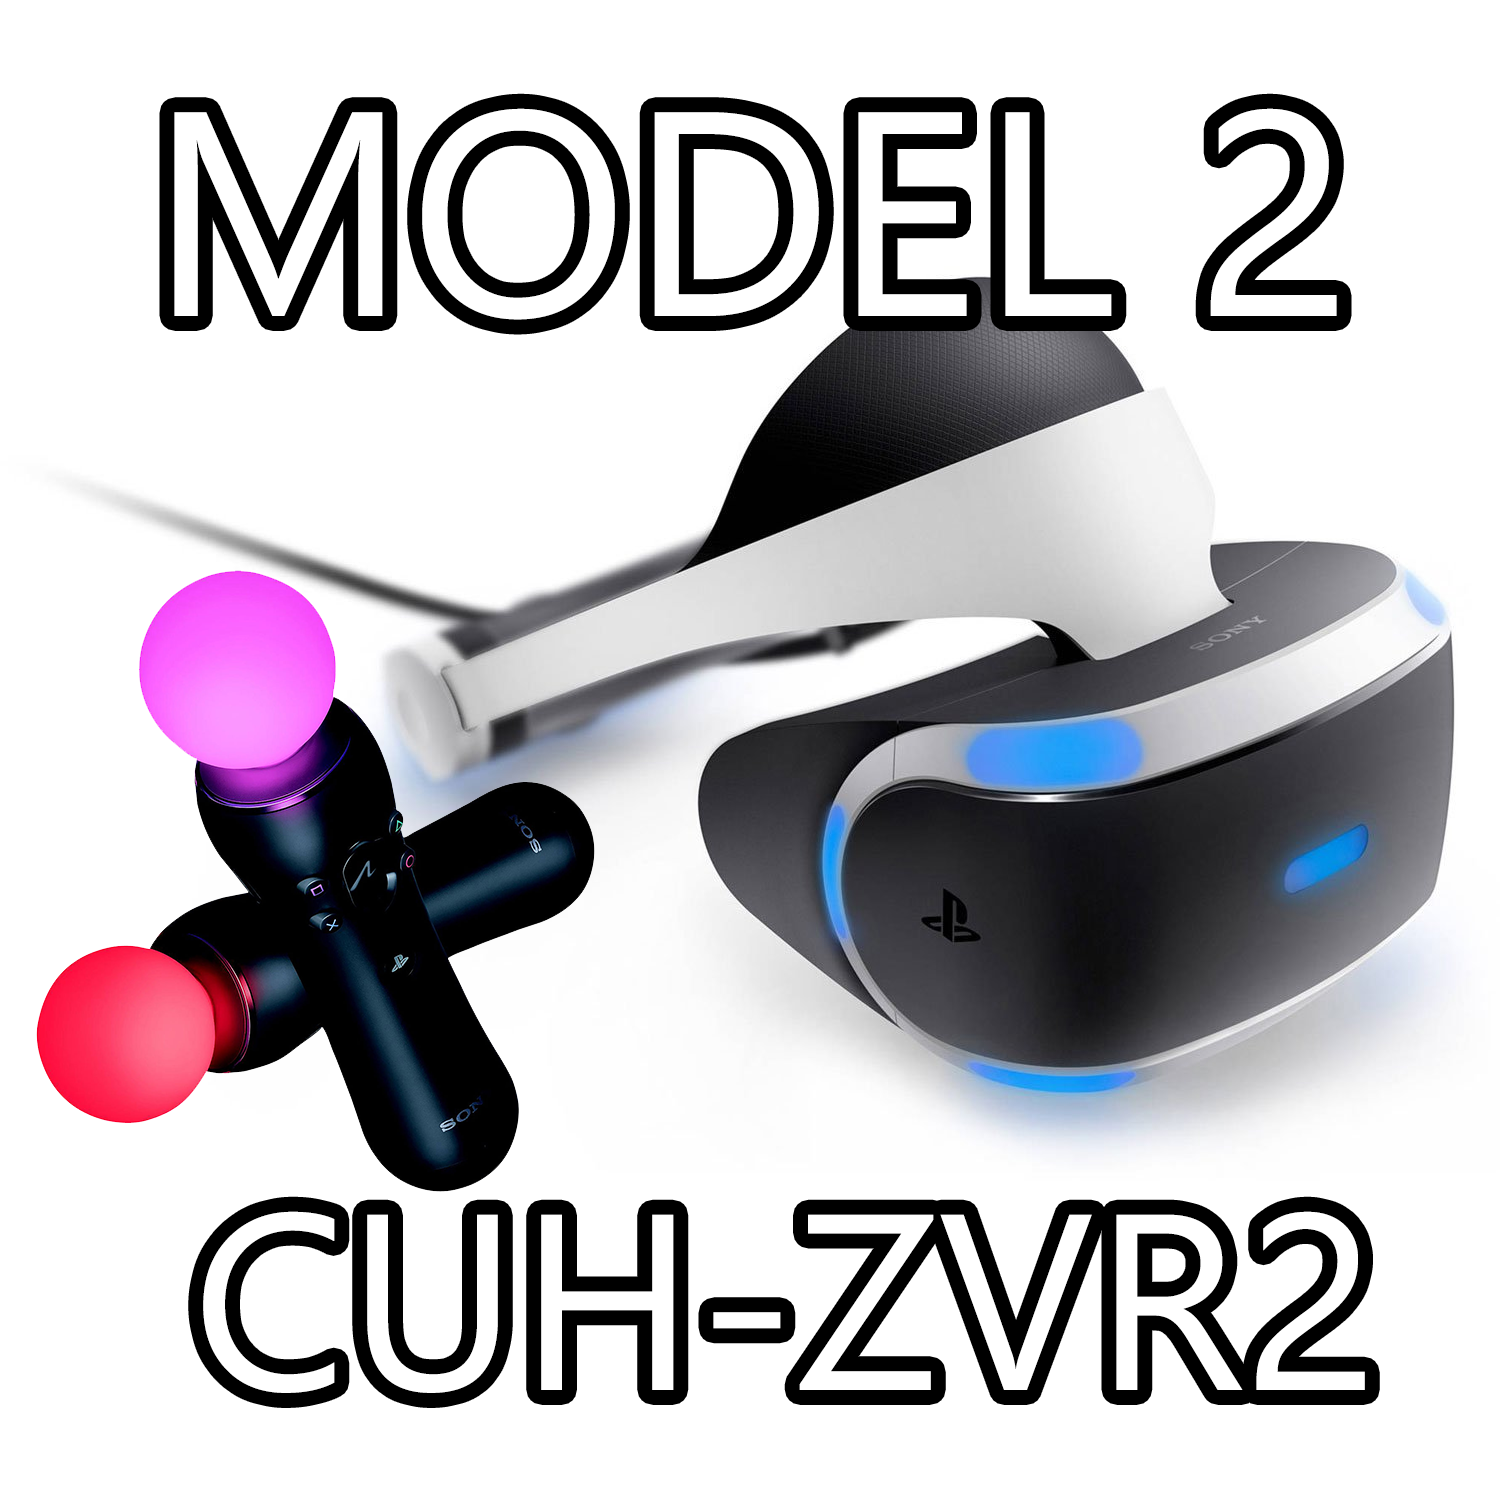 PlayStation VR Model 2 (CUH-ZVR2) Bundle - Includes 2 Move Controllers